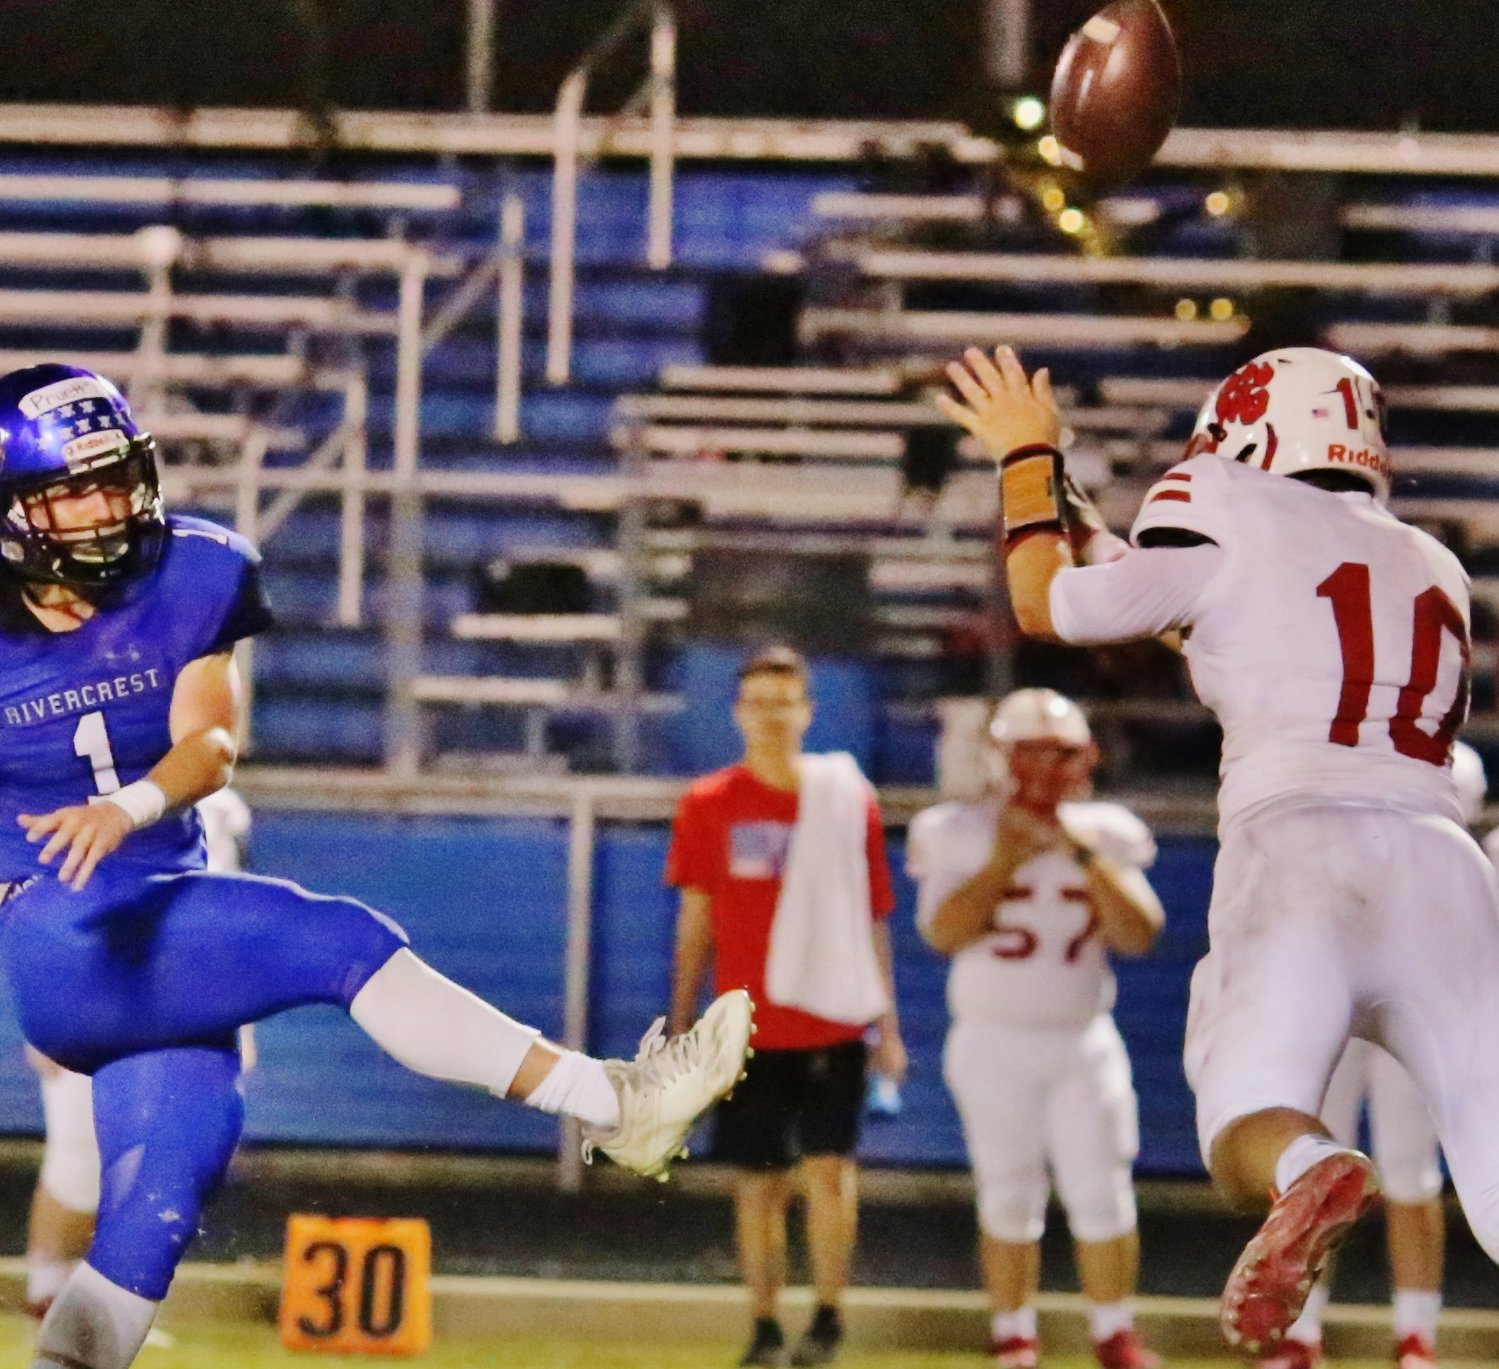 Blake Weissert swatted away a Rivercrest field goal attempt late in the first half of the 15-14 win over the Rebels.